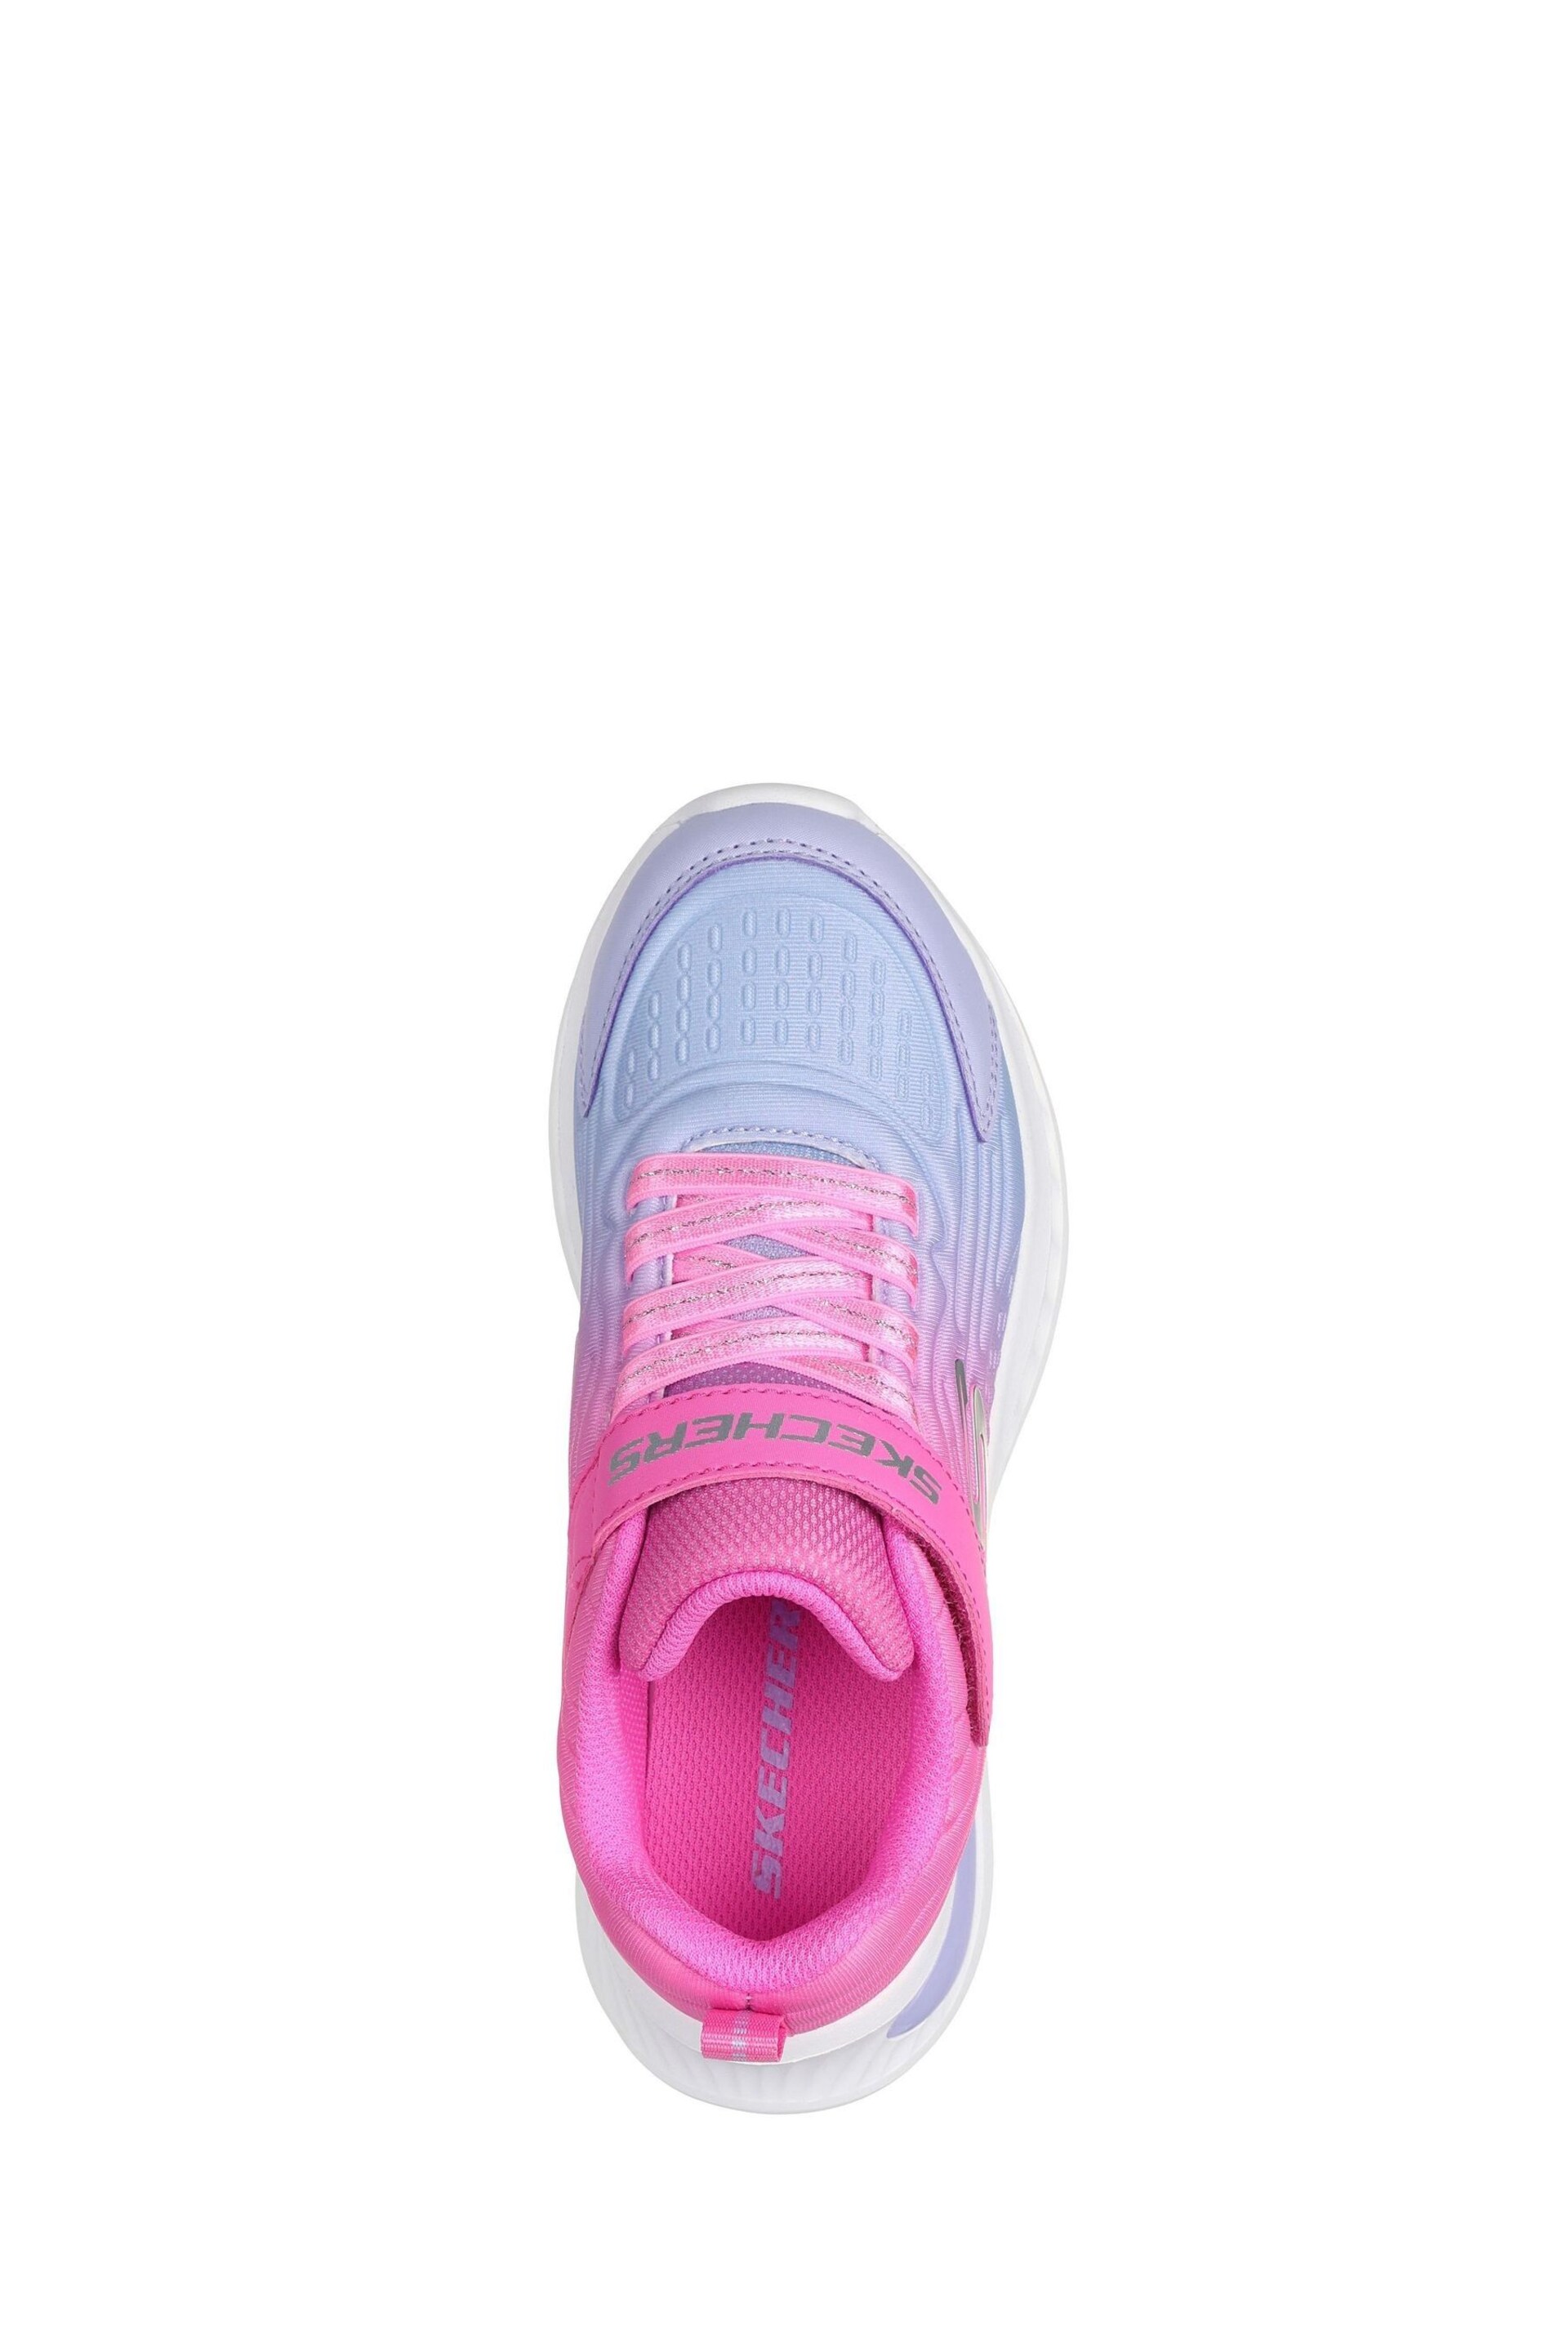 Skechers Pink Jumpsters Tech Trainers - Image 4 of 5